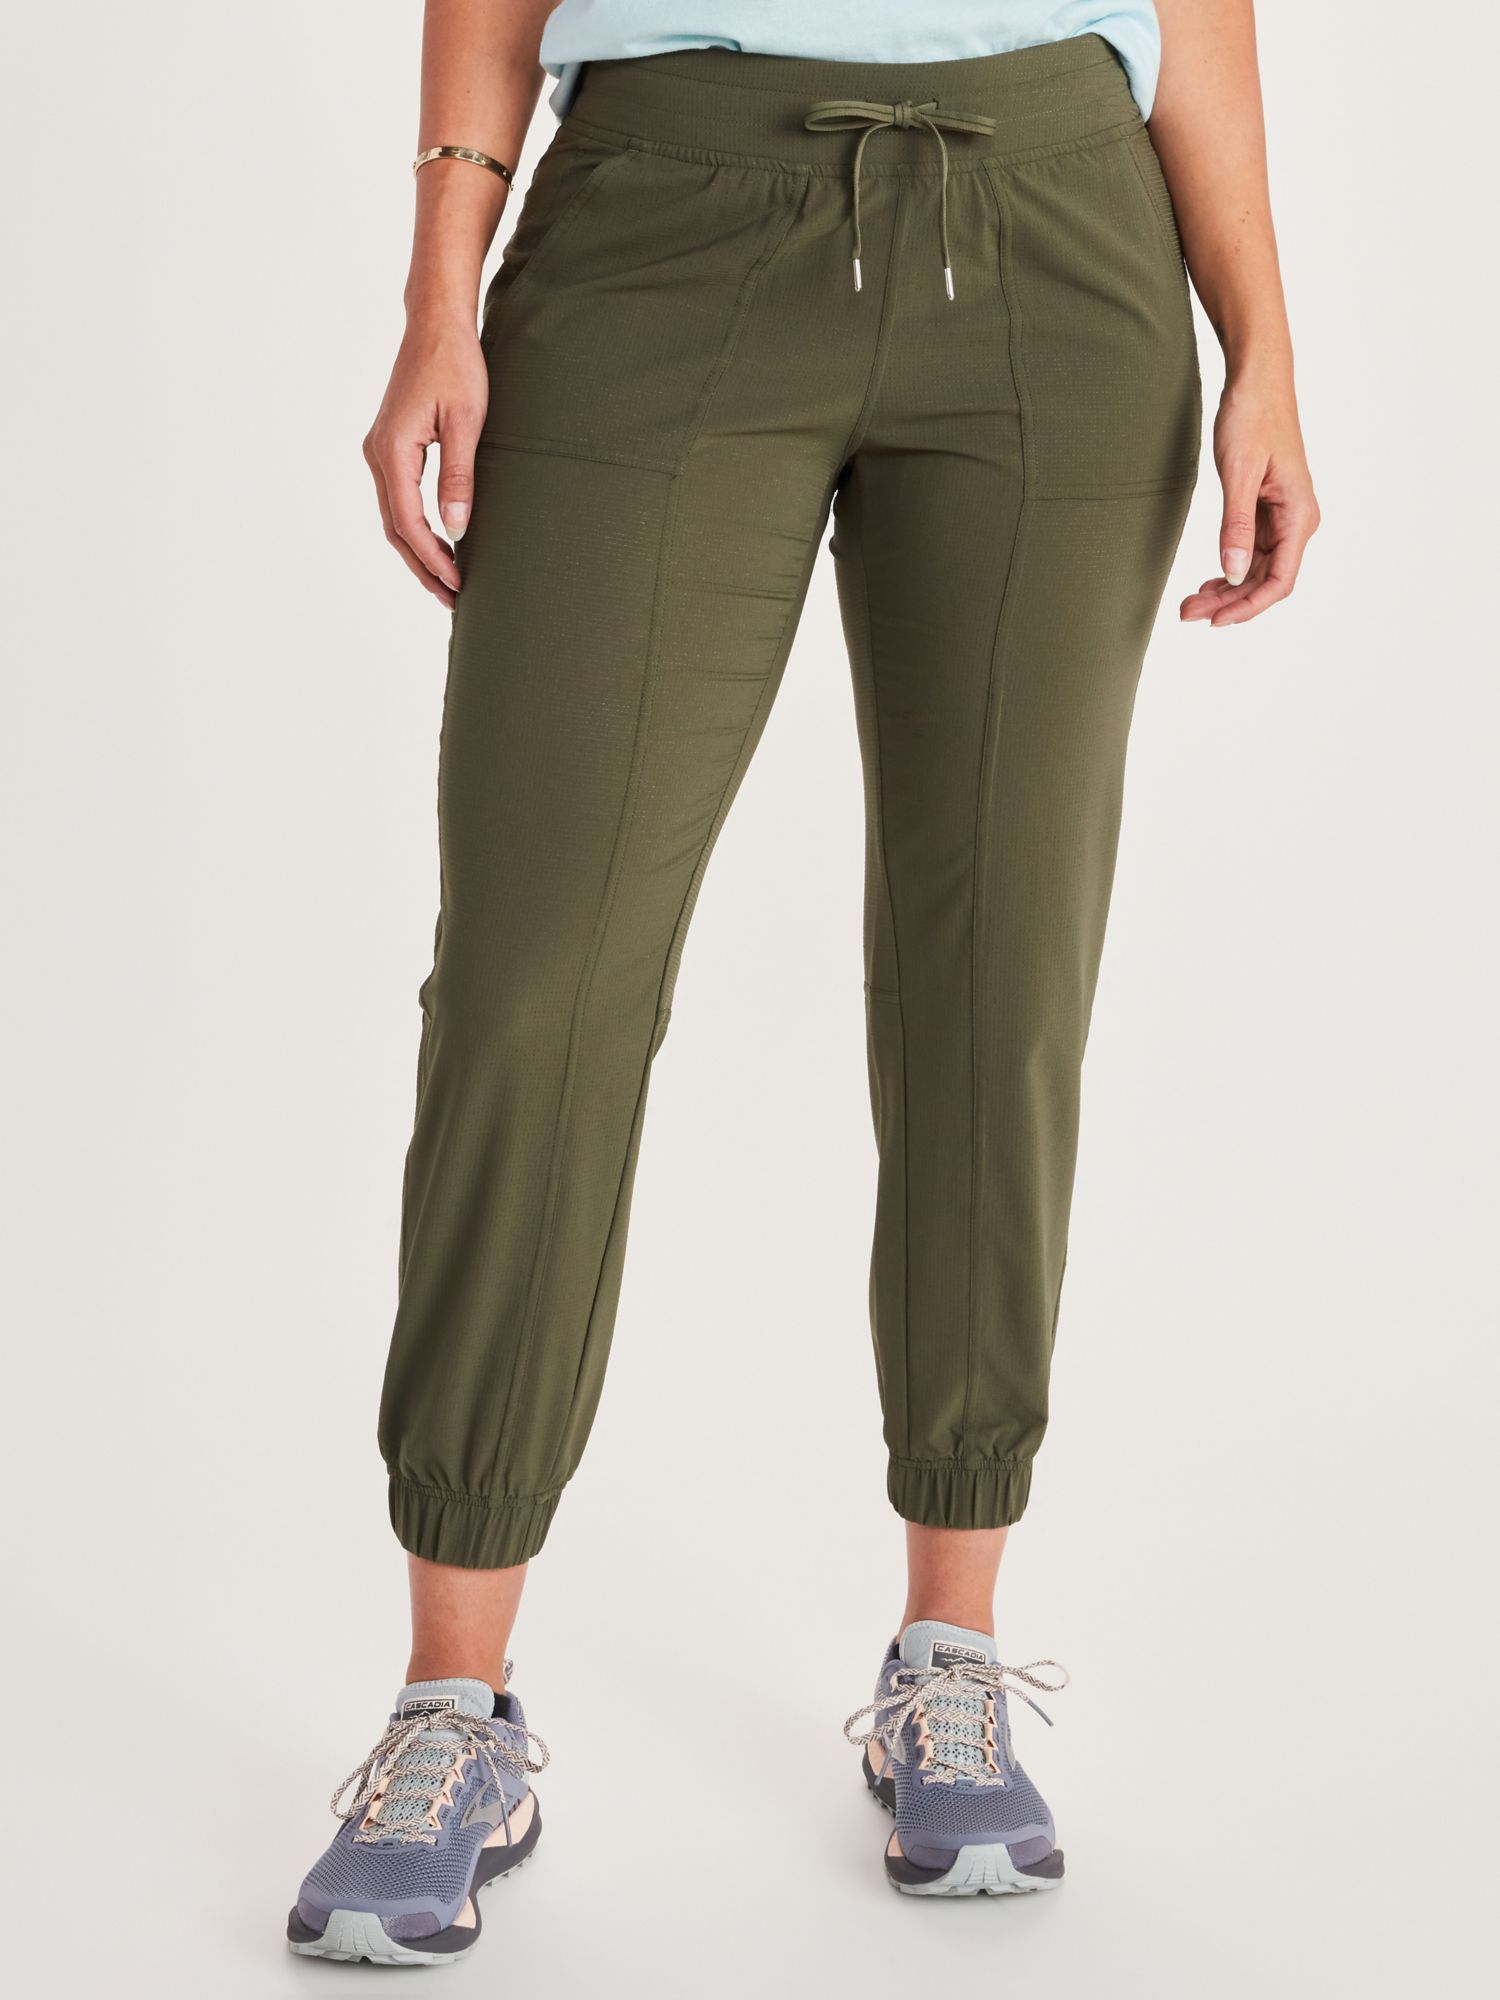 top rated womens joggers